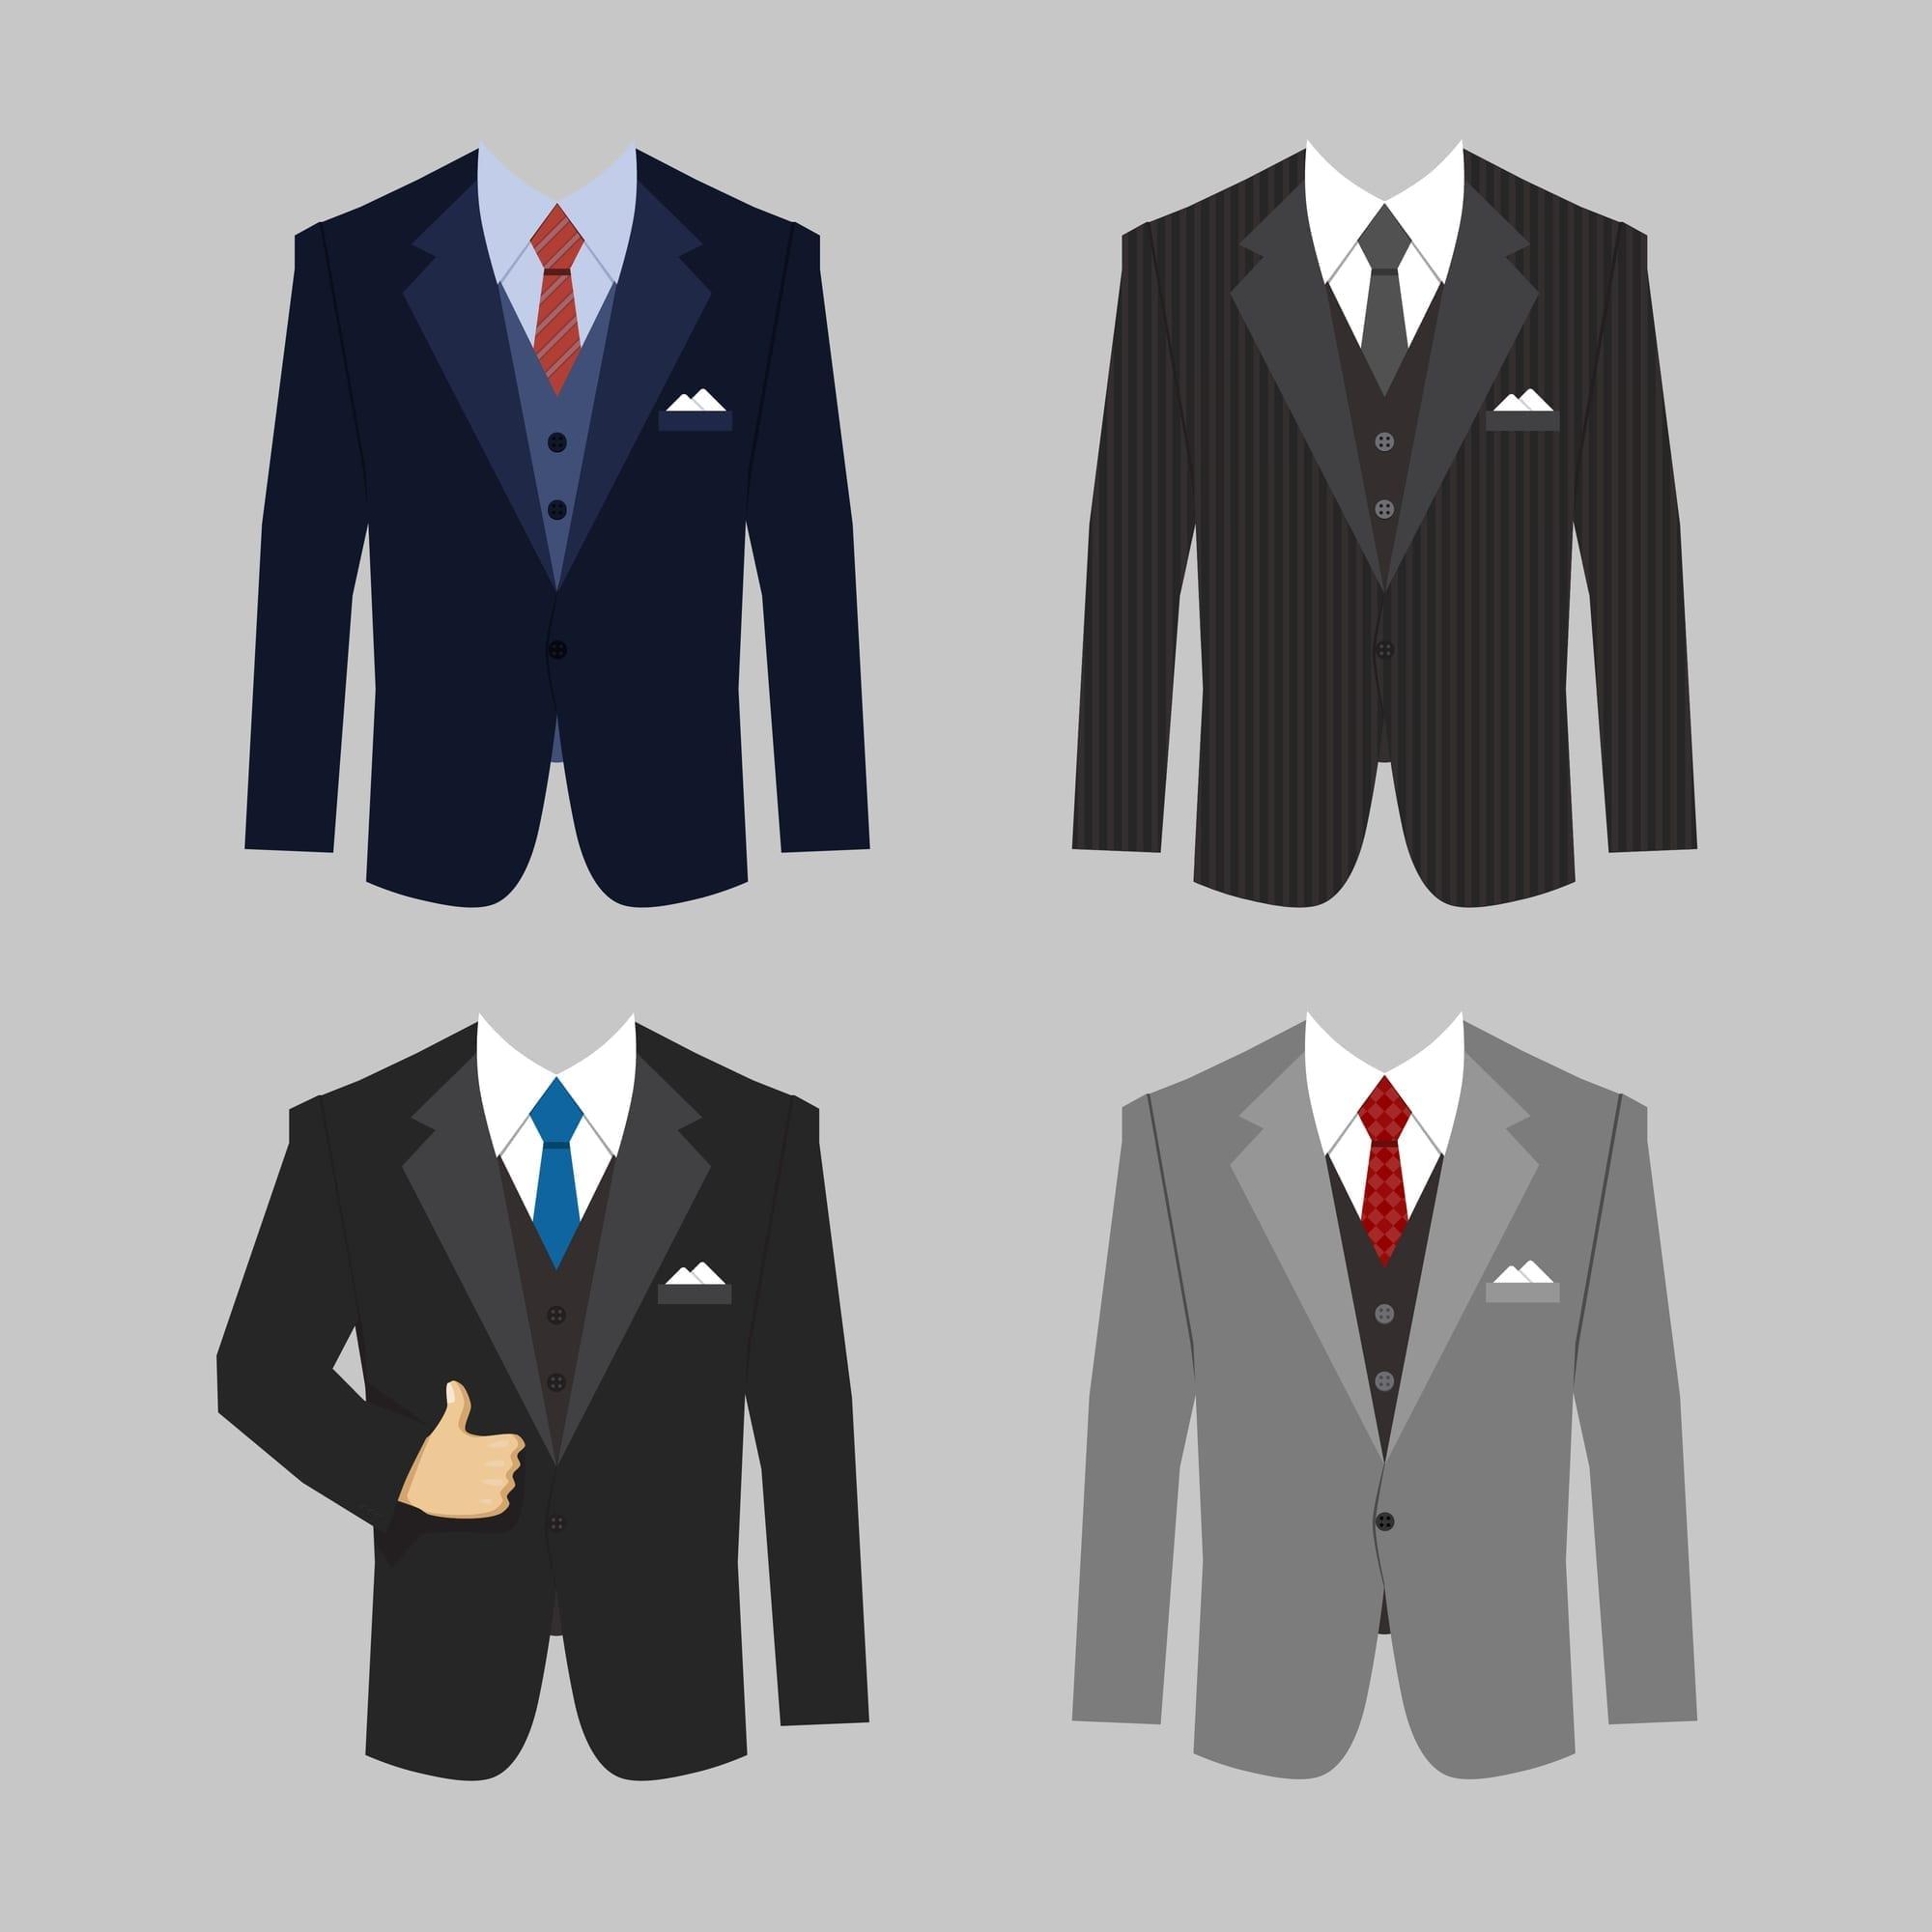 Meaning of suit colors: black, blue, navy, gray